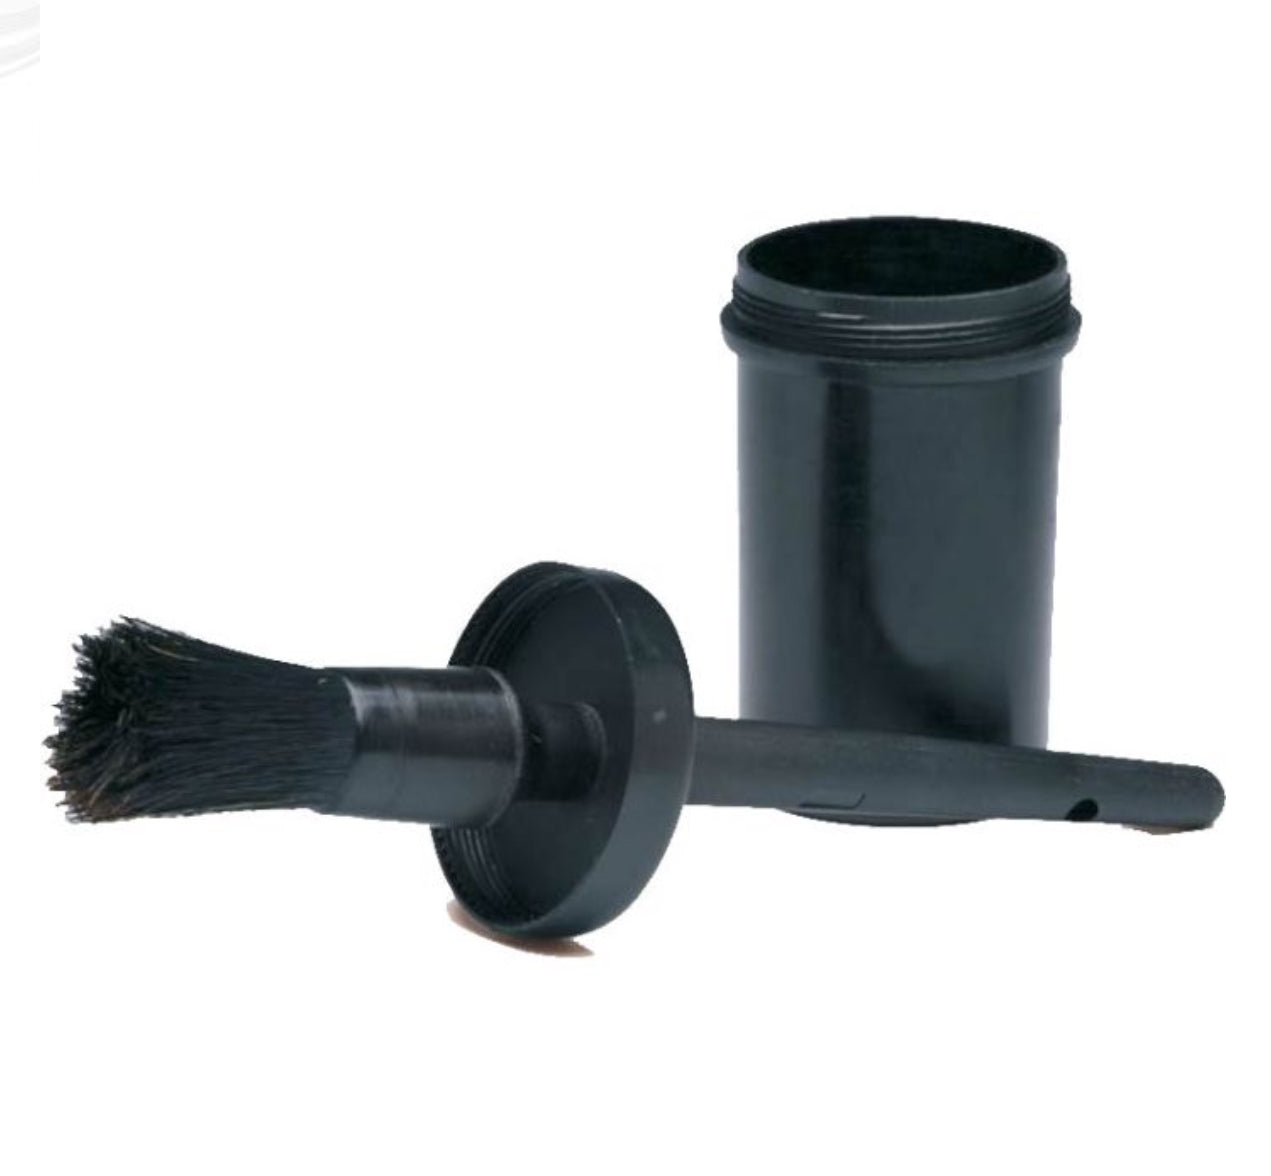 Hoof Oil Brush and Container